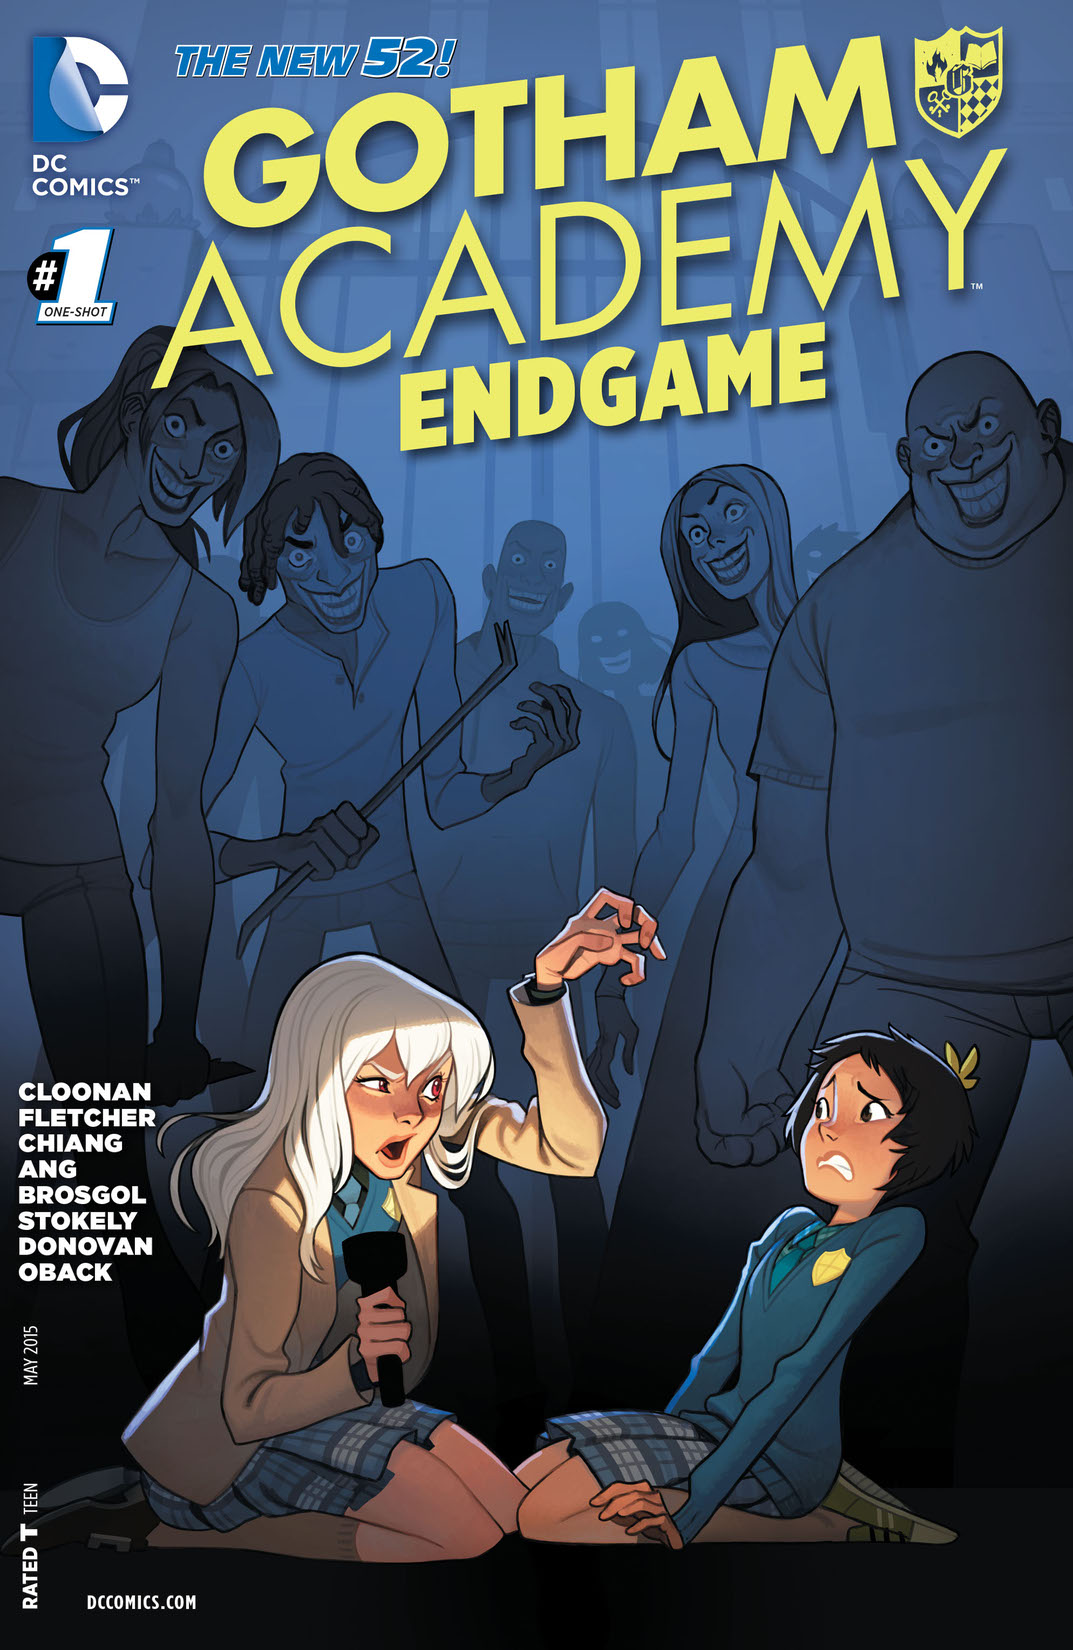 Gotham Academy: Endgame #1 preview images